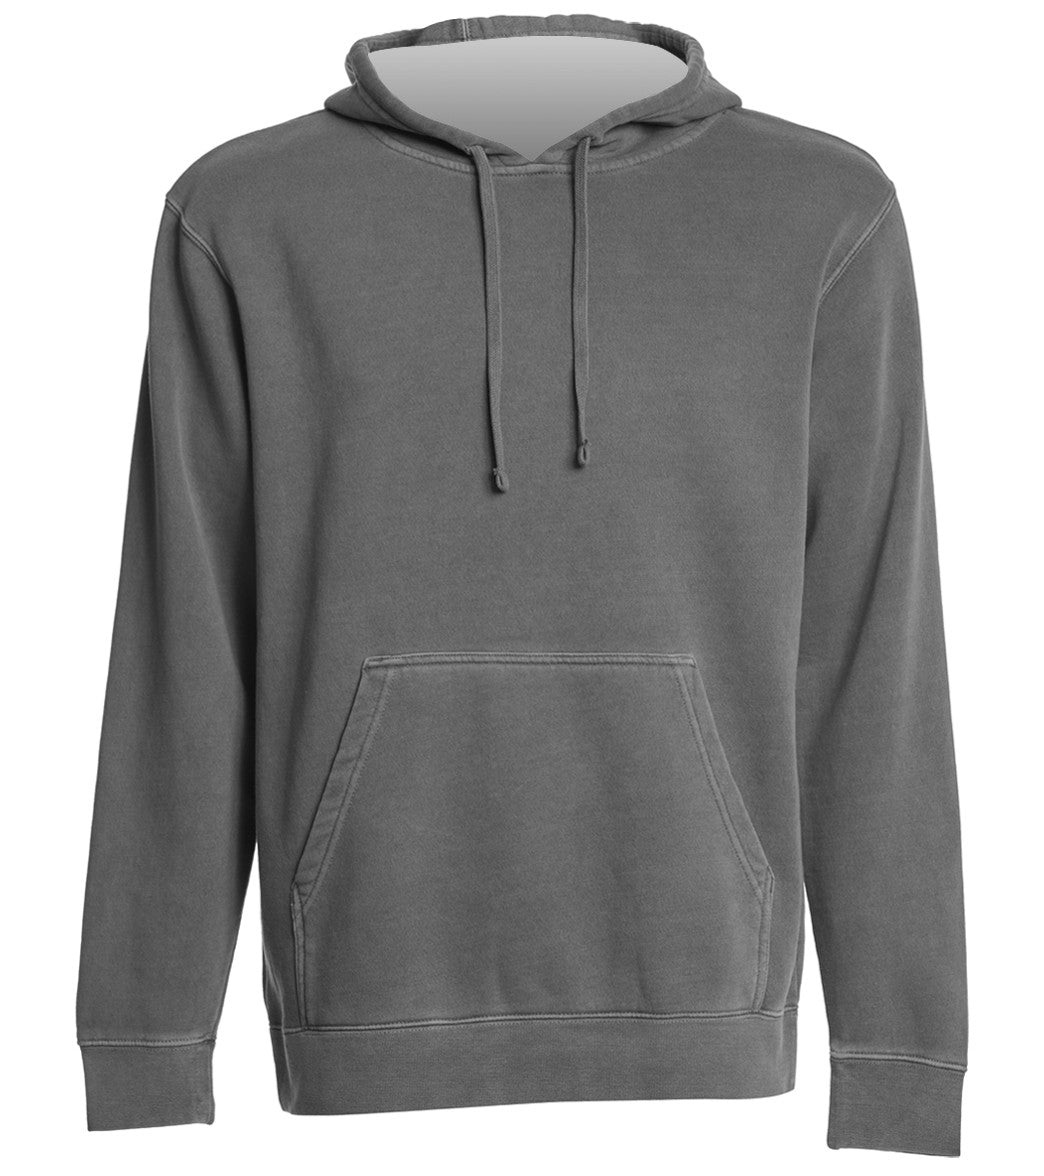 Men's Midweight Pigment Dyed Hooded Sweatshirt - Black Large Cotton/Polyester - Swimoutlet.com